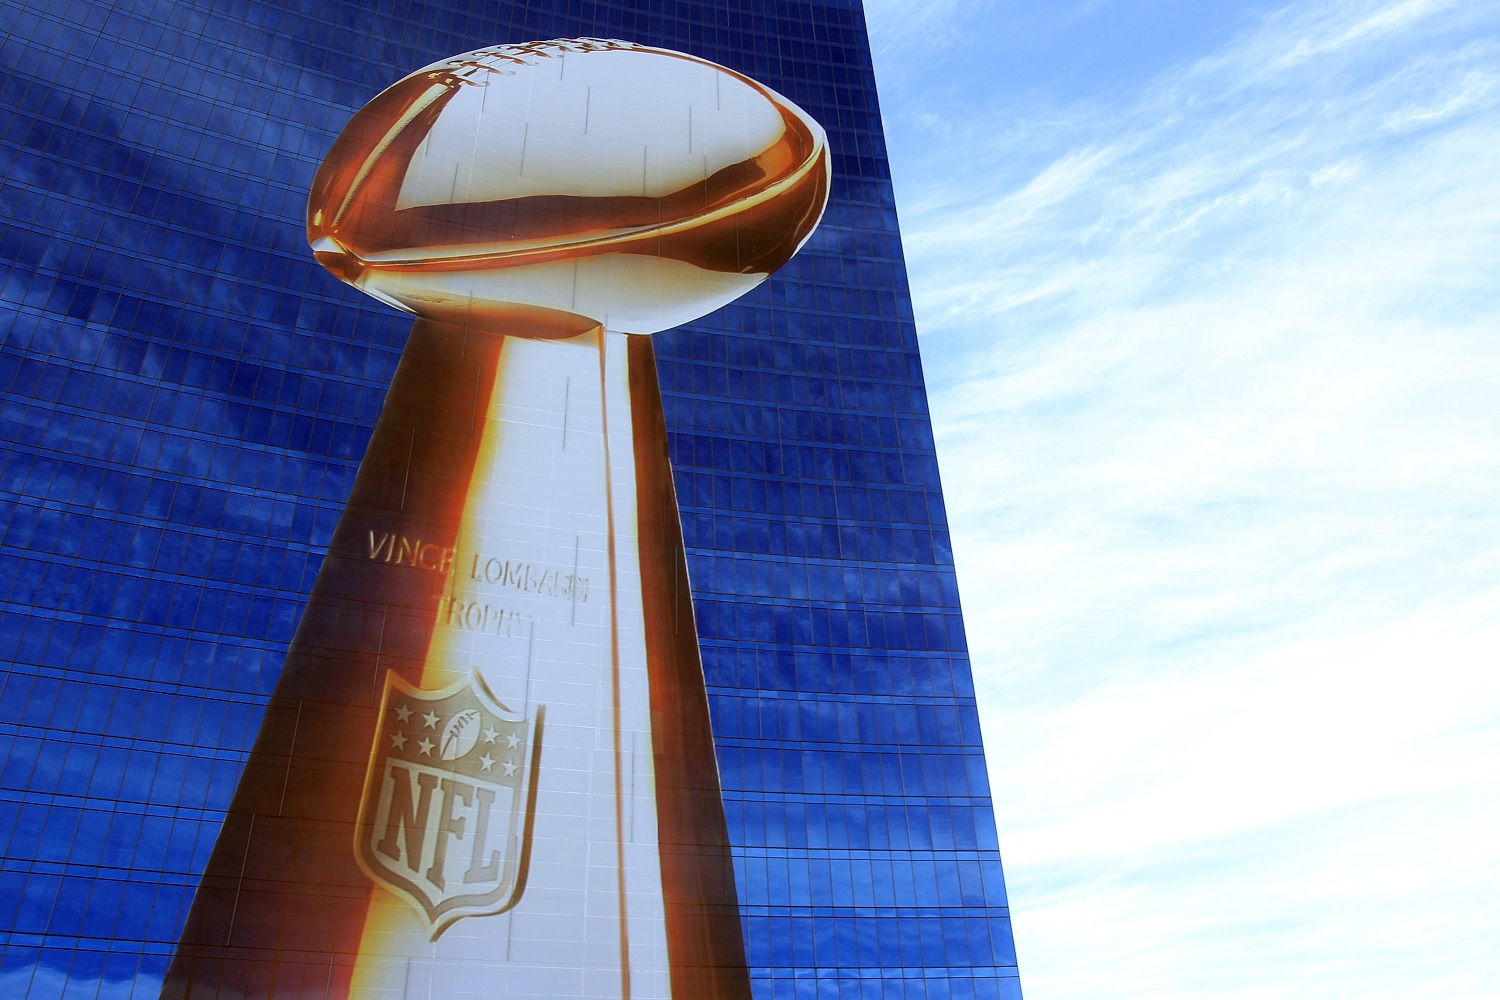 Official signage of the Lombardi Trophy and Super Bowl XLVI is seen on the exterior of the J.W. Marriott Indianapolis.